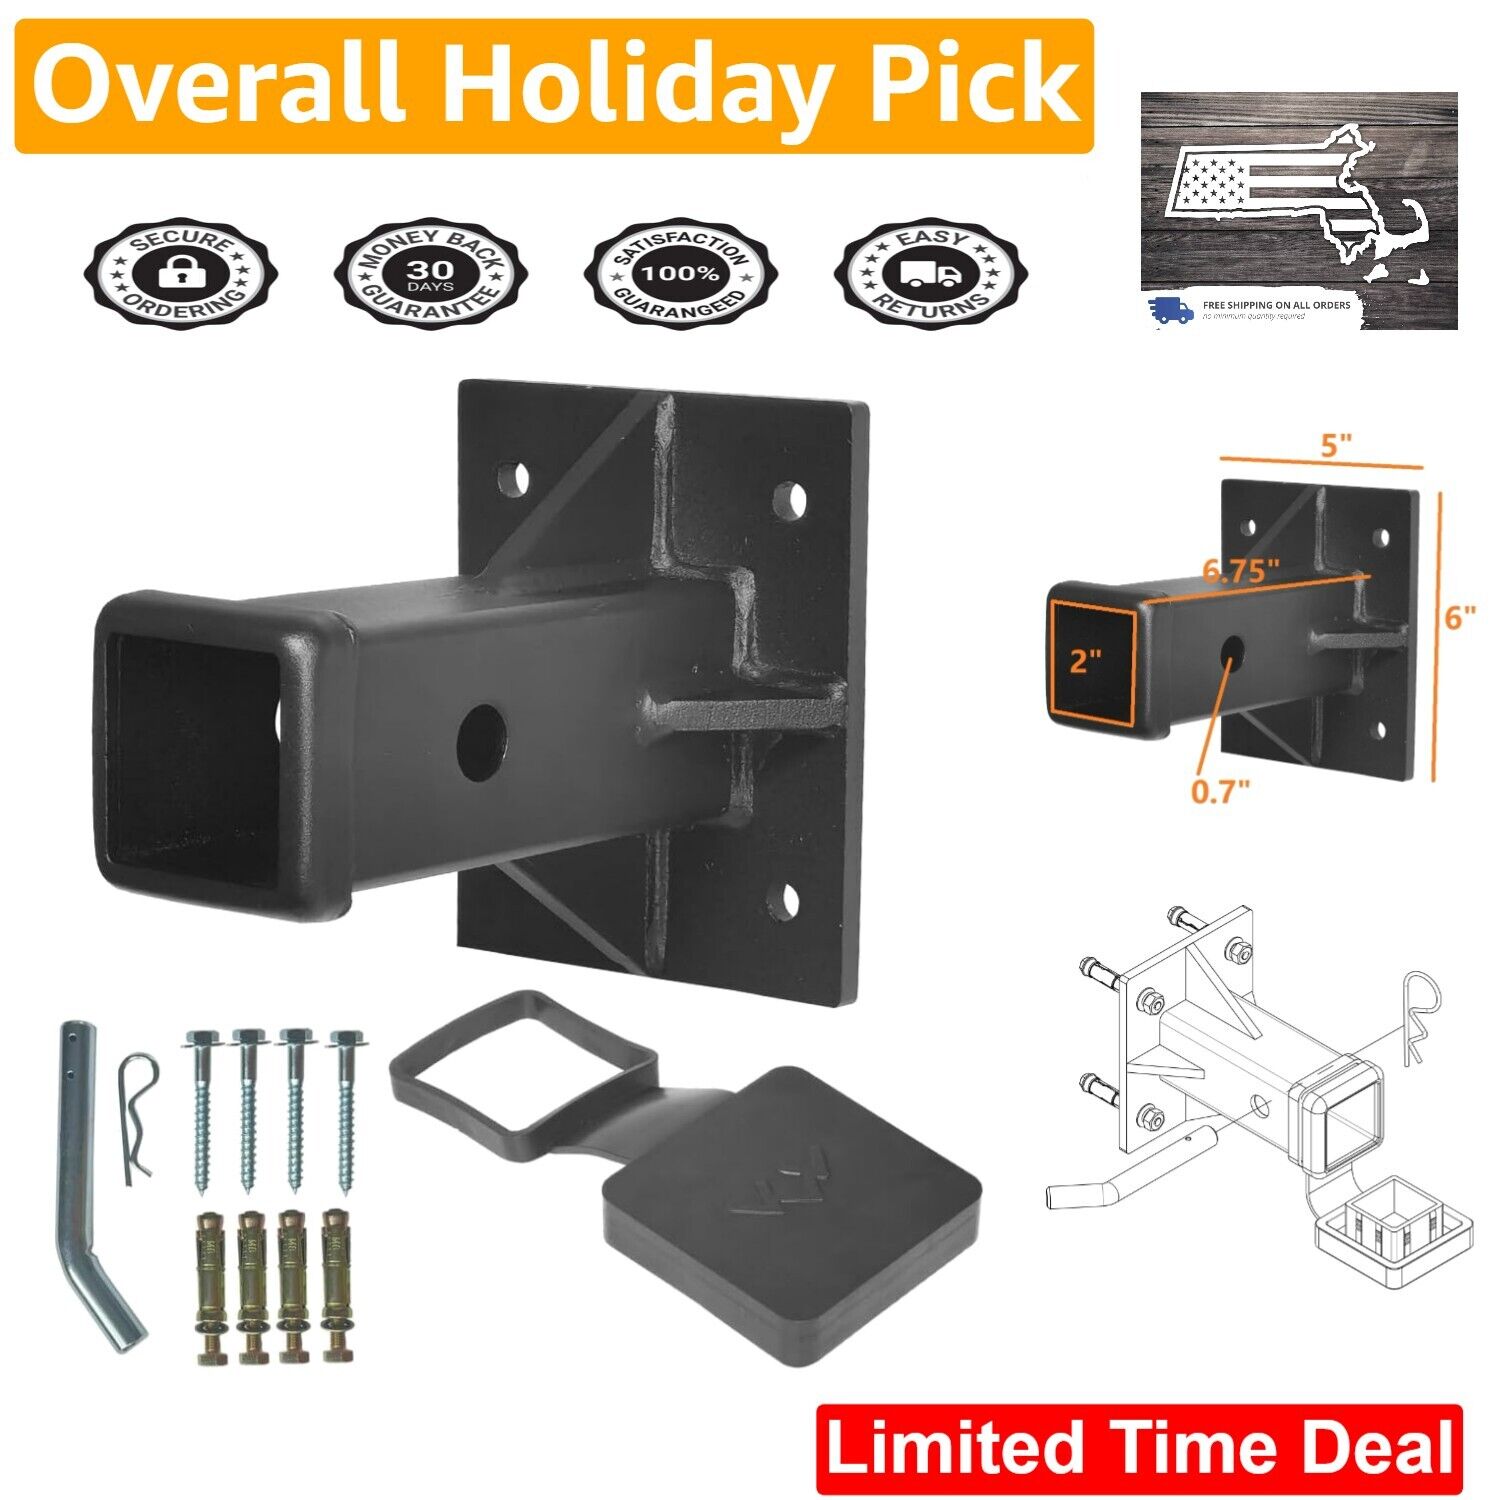 Hitch Wall Mount Receiver - 2 Inch Opening - Universal - Max Load 20000LBS